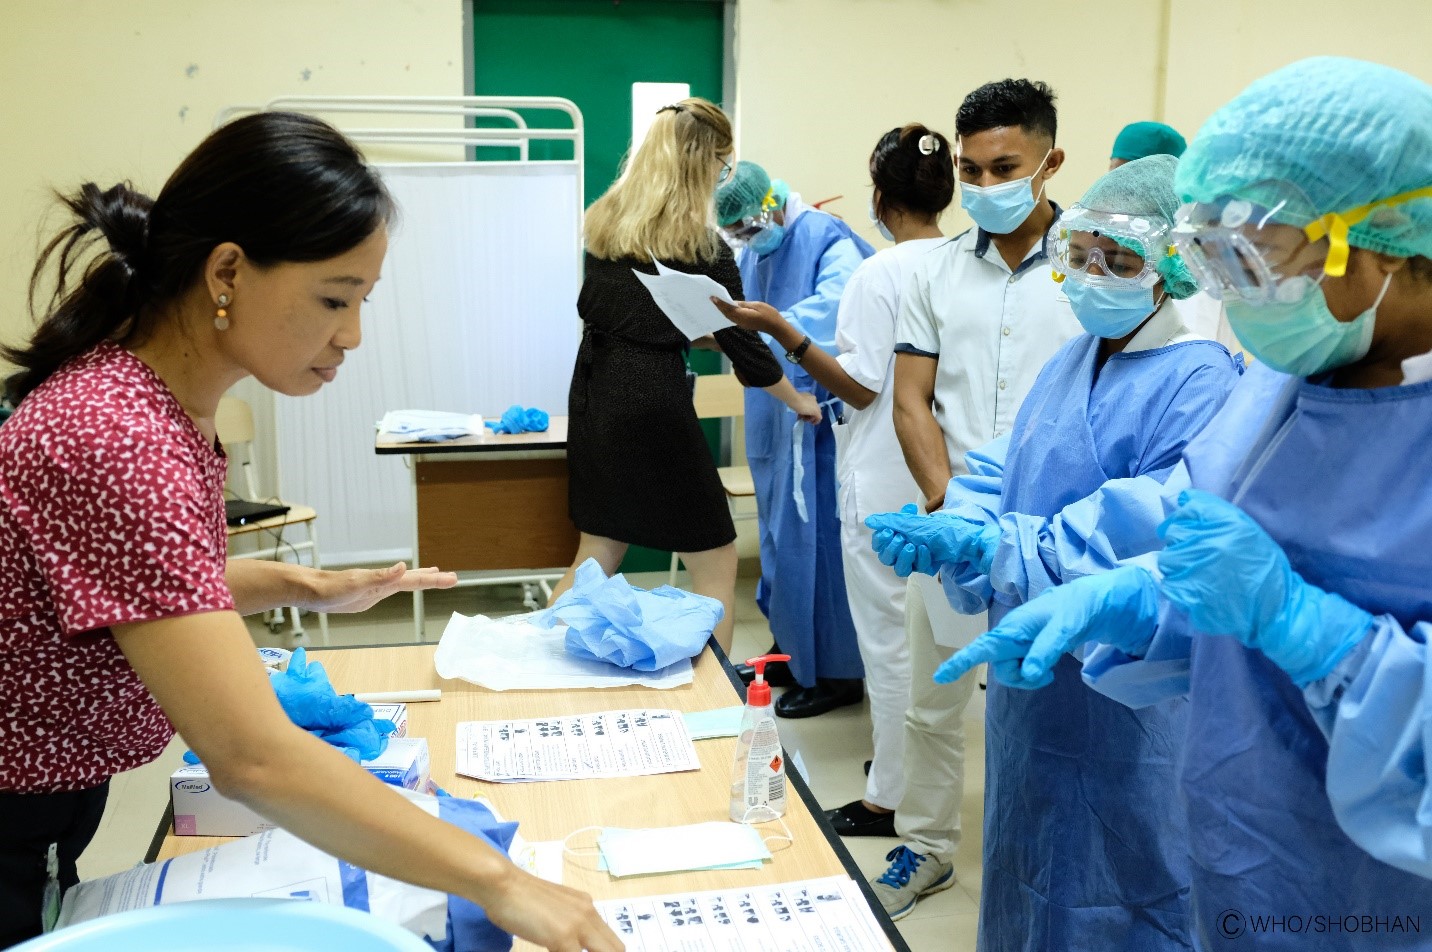 Photo of frontline health workers in Timor-Leste getting trained on PPE use during COVID-19